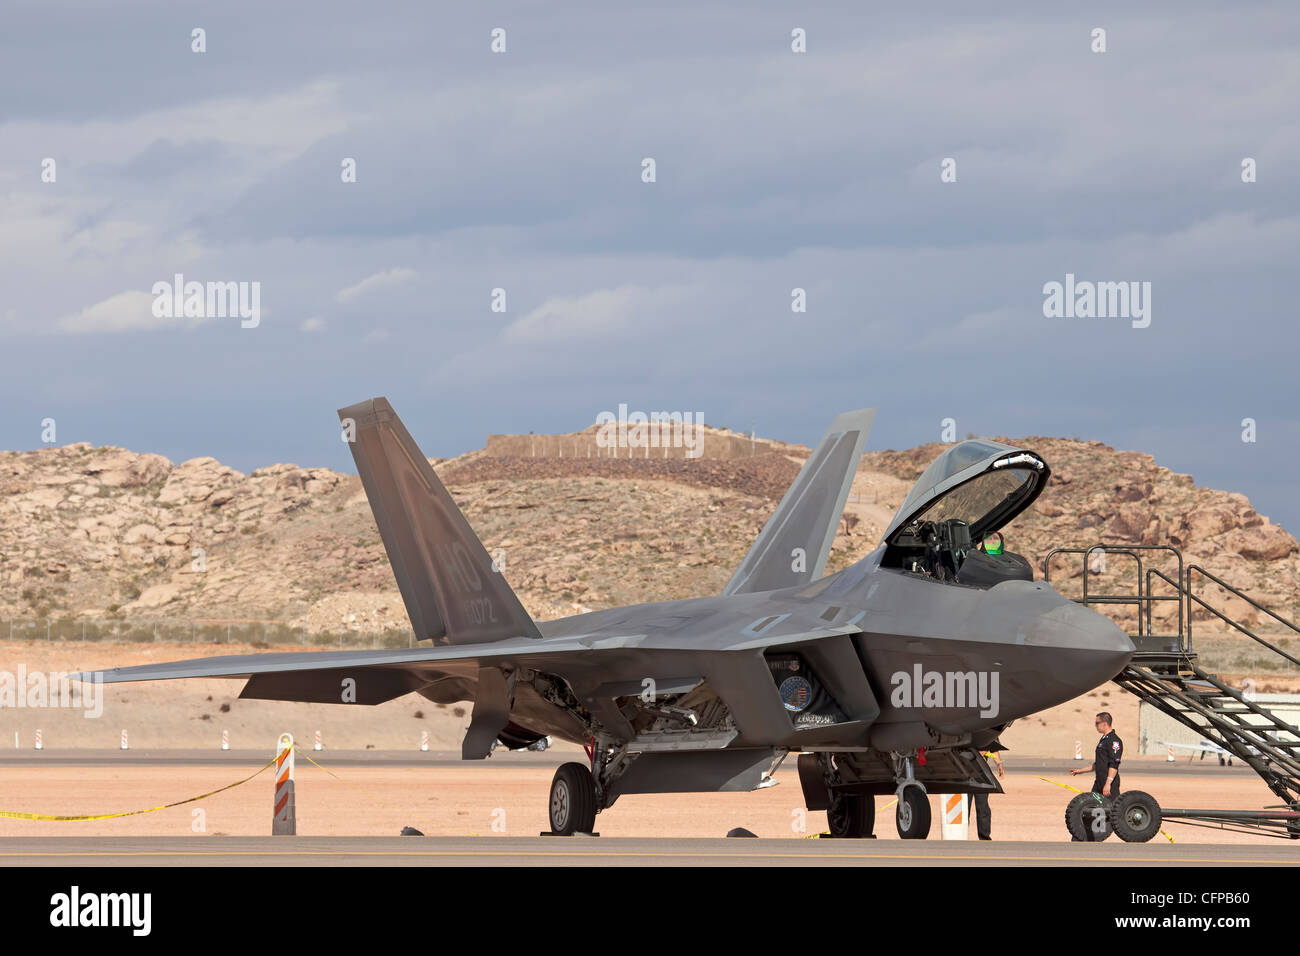 USAF F-22 Raptor air superiority fighter on ground with crew preparing for flight. Runway in desert. Stock Photo